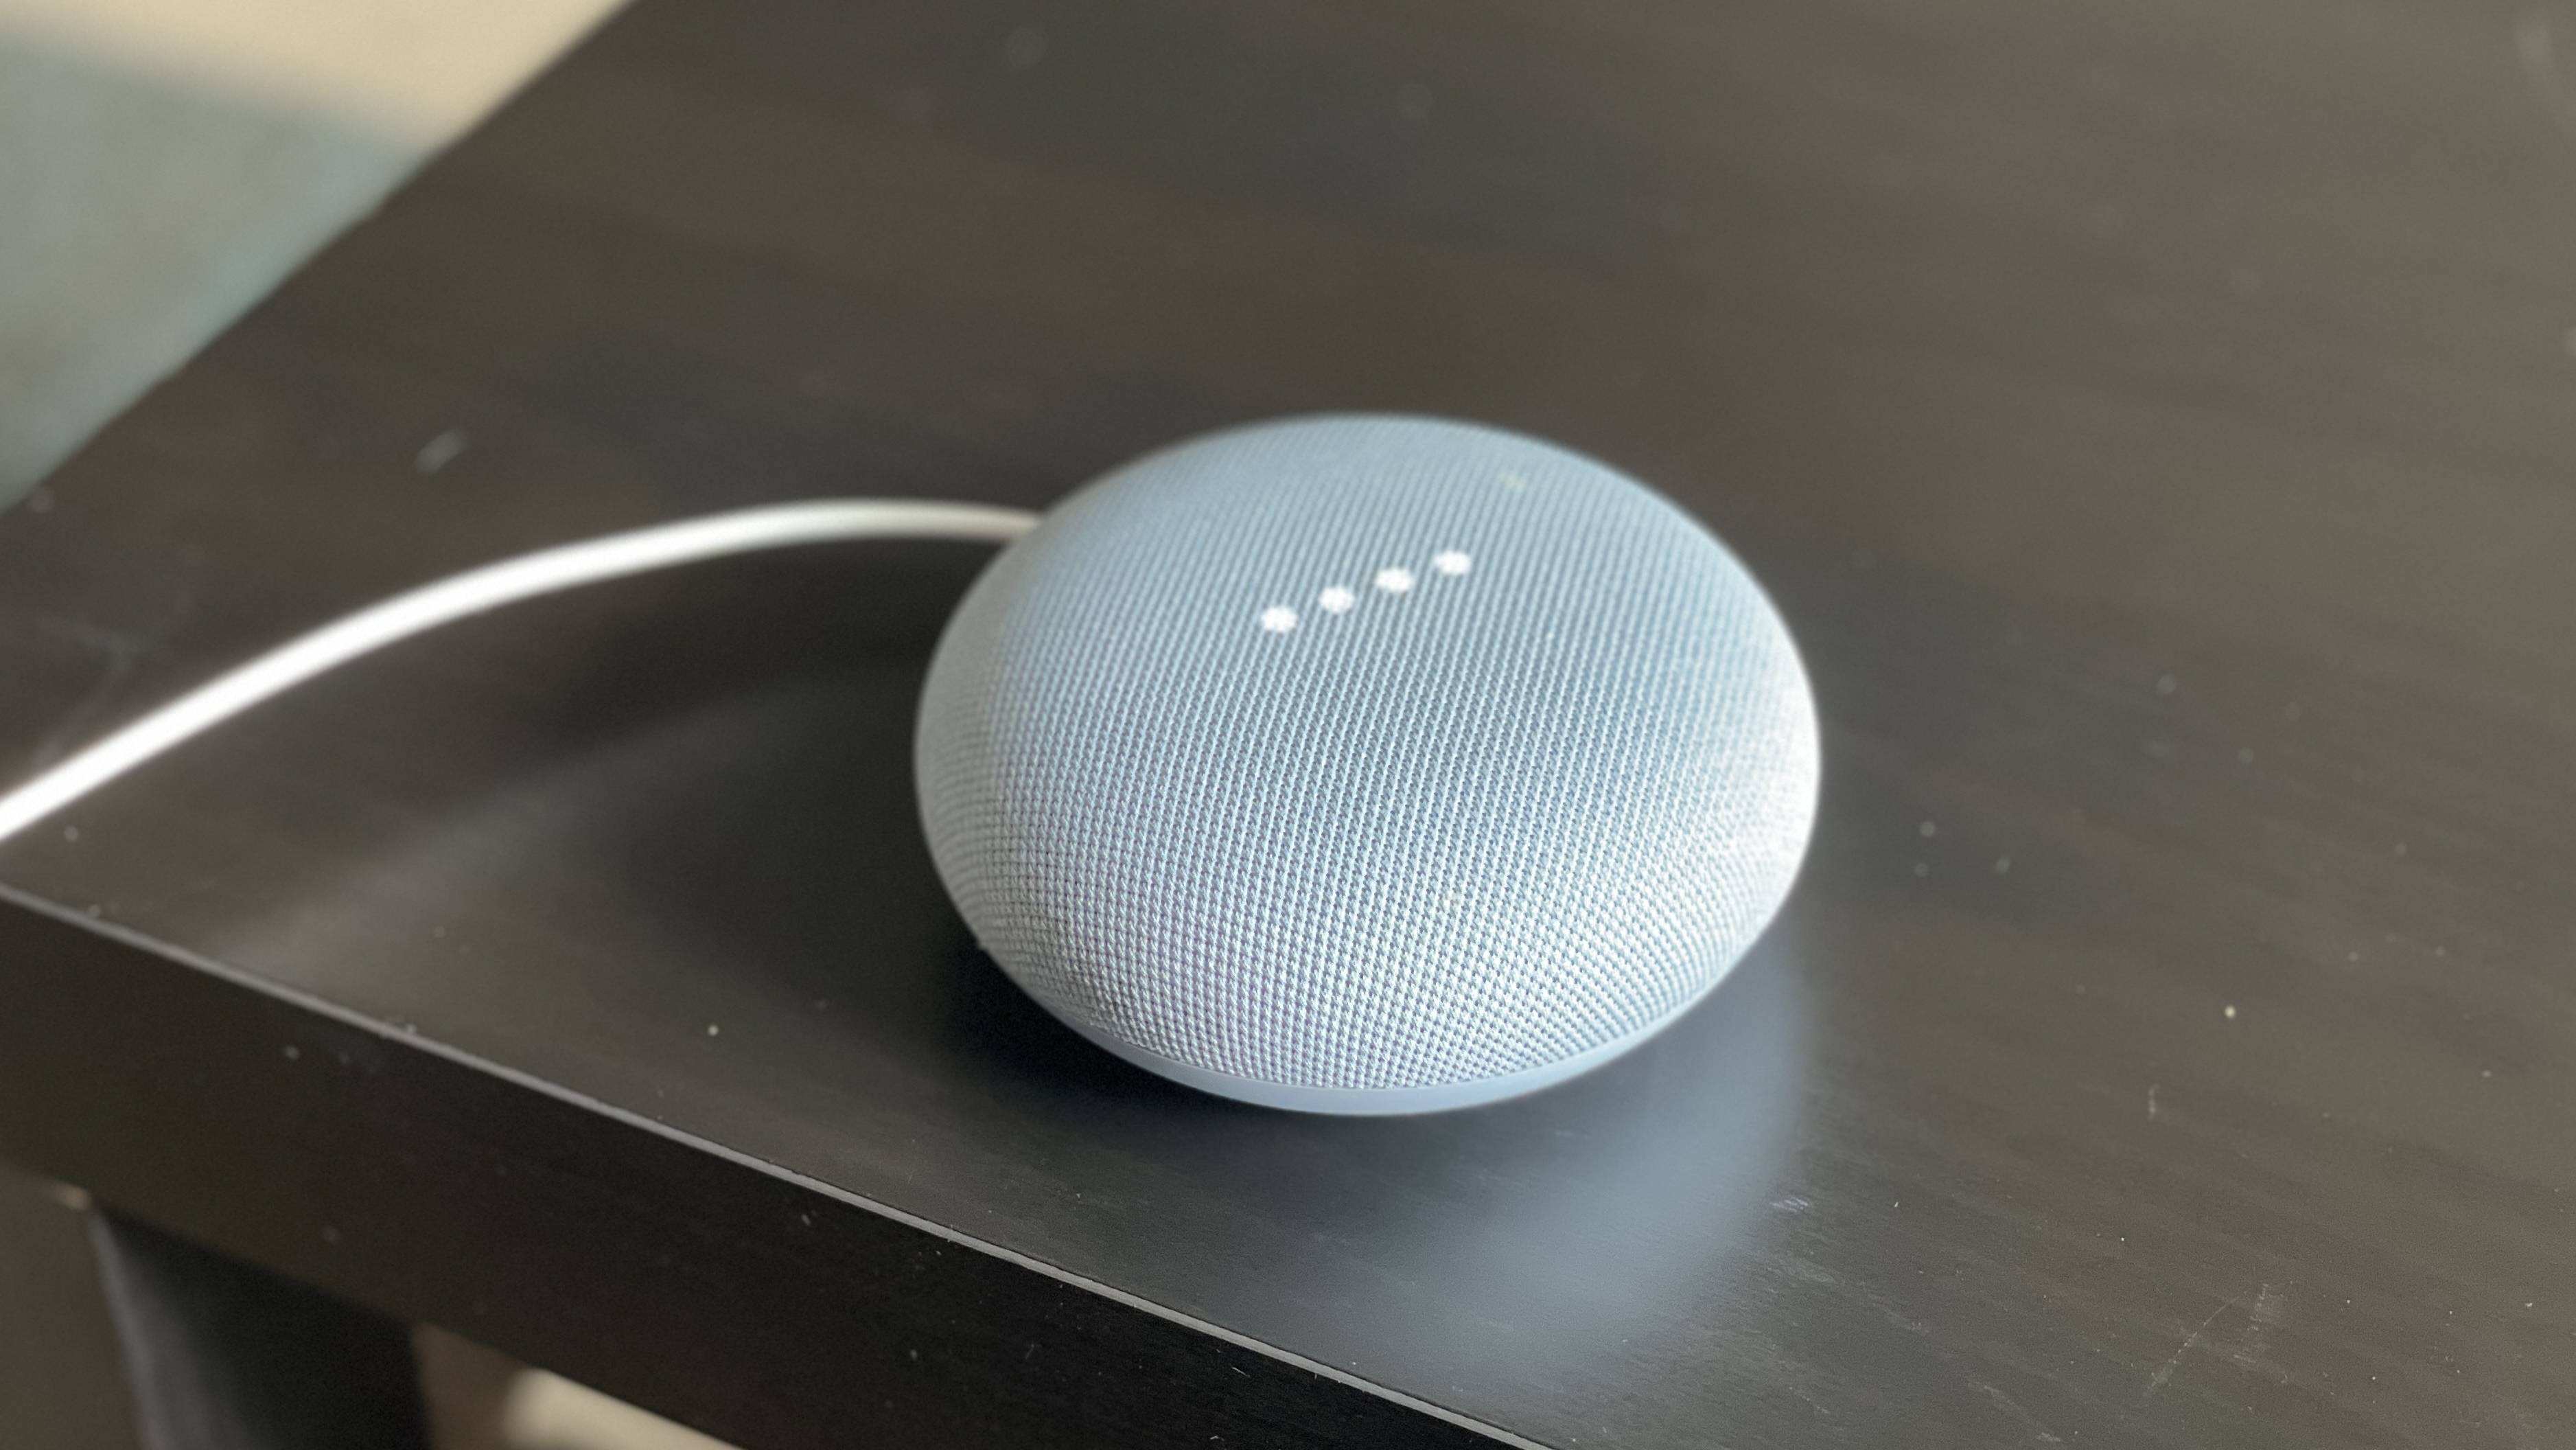 Google Nest Mini review: better bass and recycled plastic